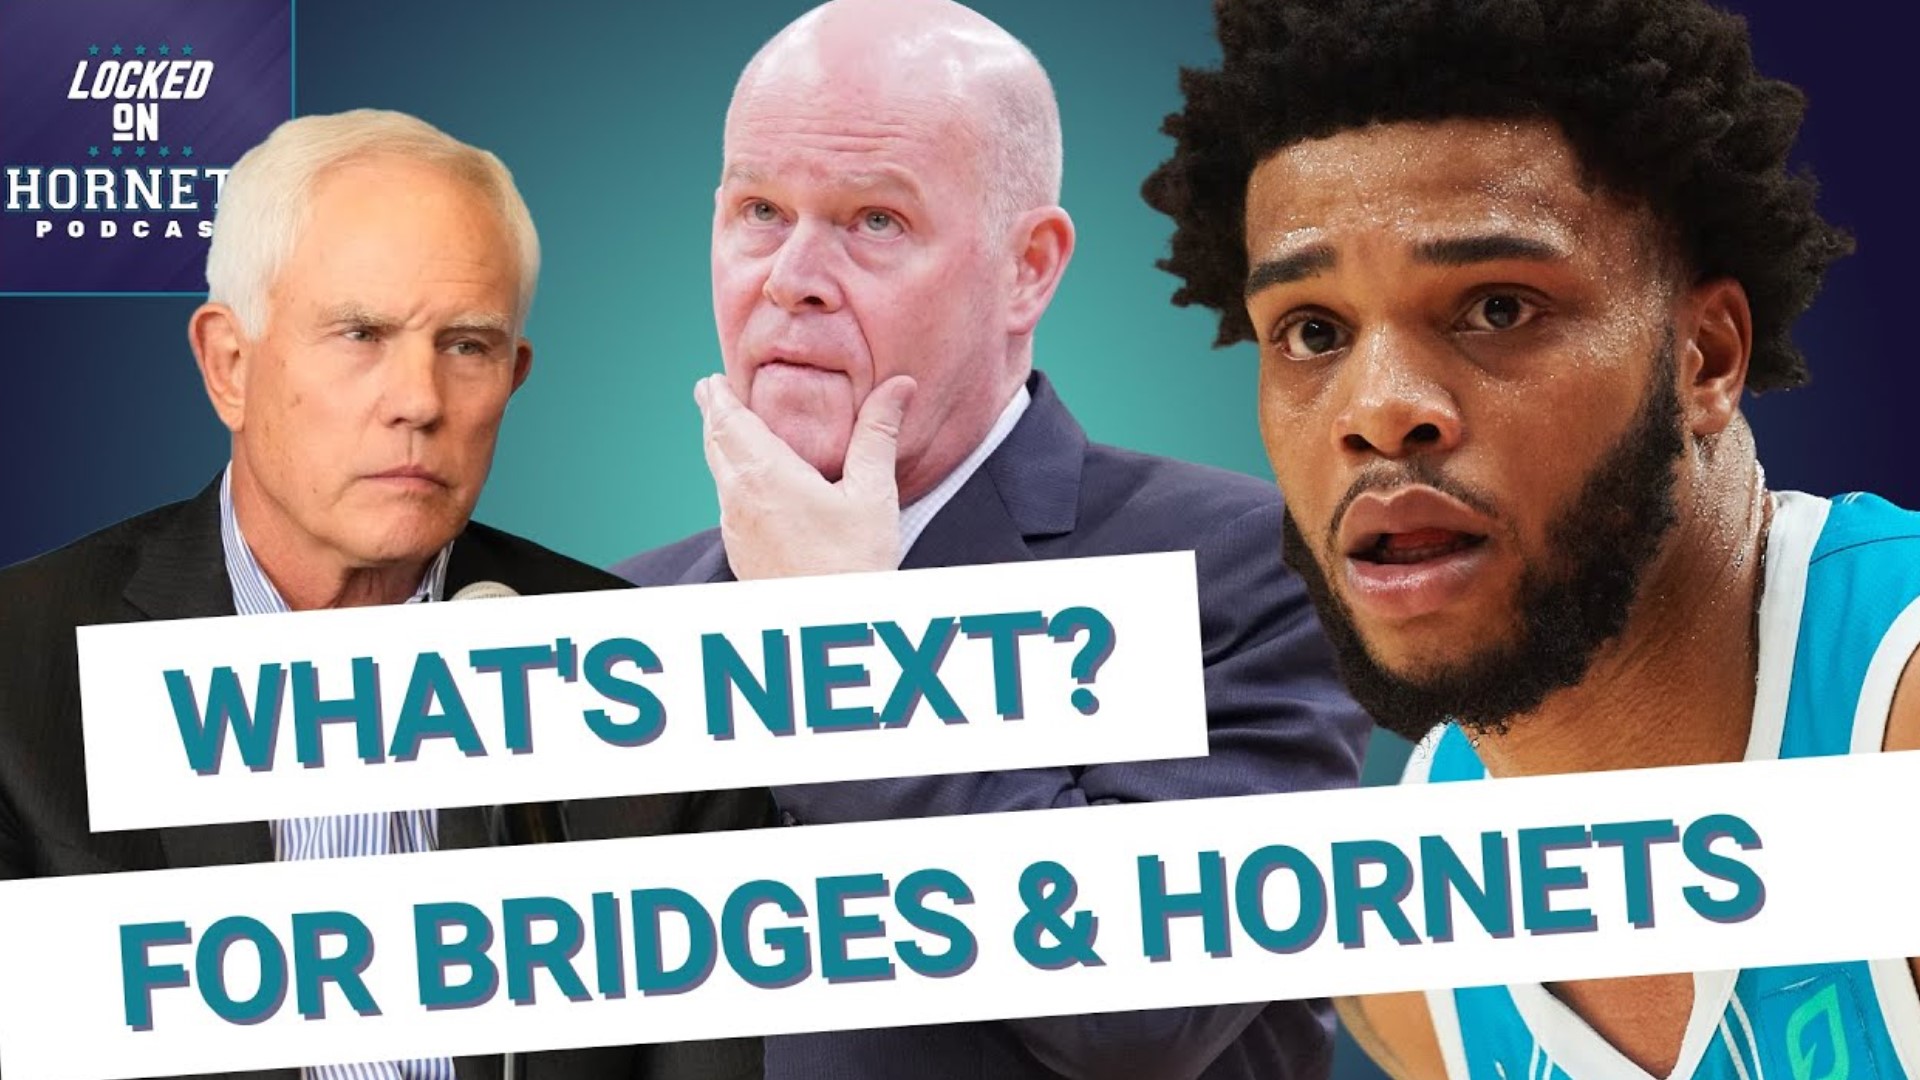 Miles Bridges pleaded guilty to 3 felony charges of domestic violence in L.A. on Wednesday. How long will the Hornets allow this to hang over the franchise?